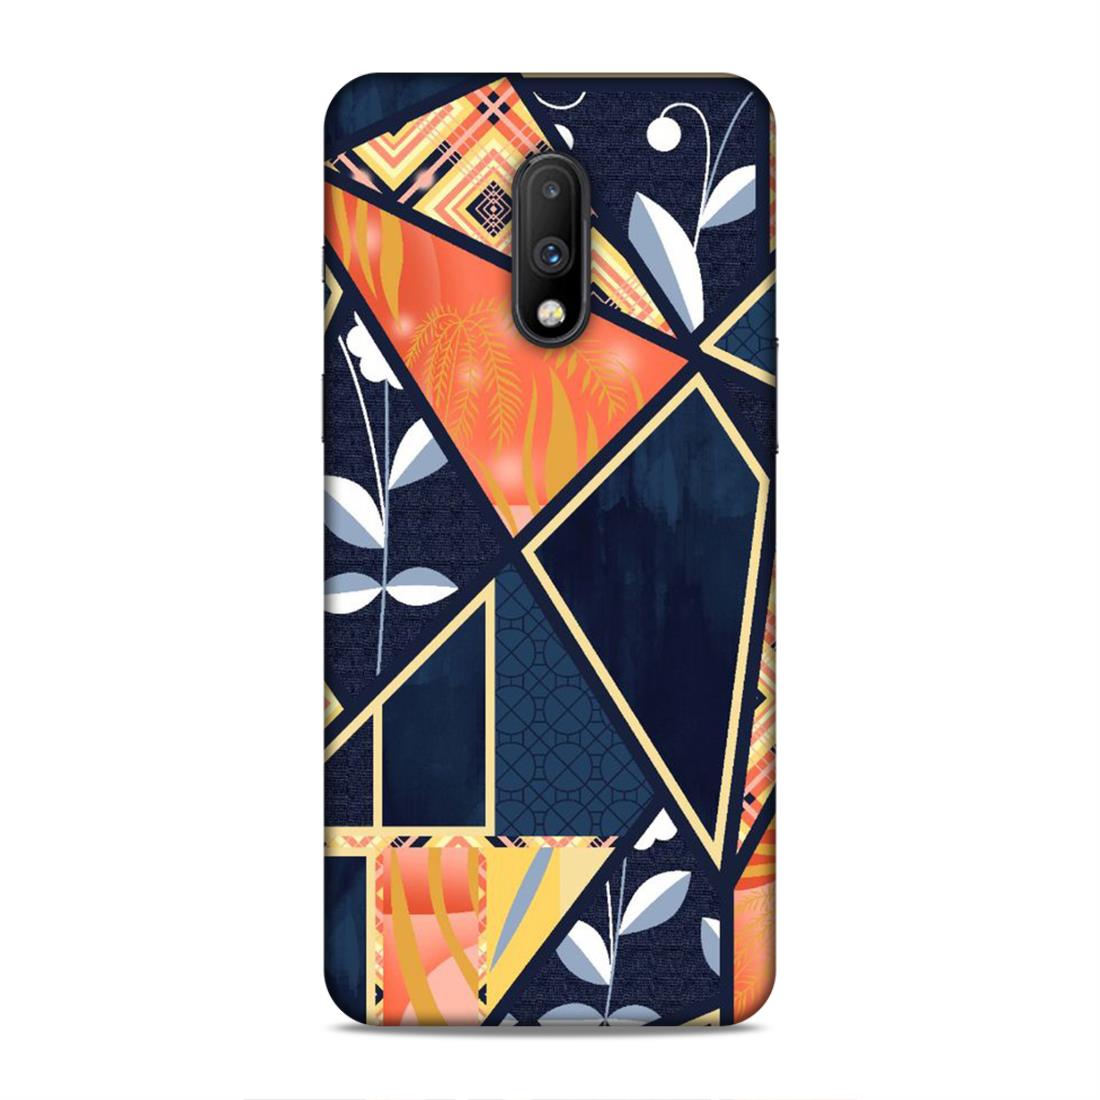 Floral Textile Pattern Hard Back Case For OnePlus 6T / 7